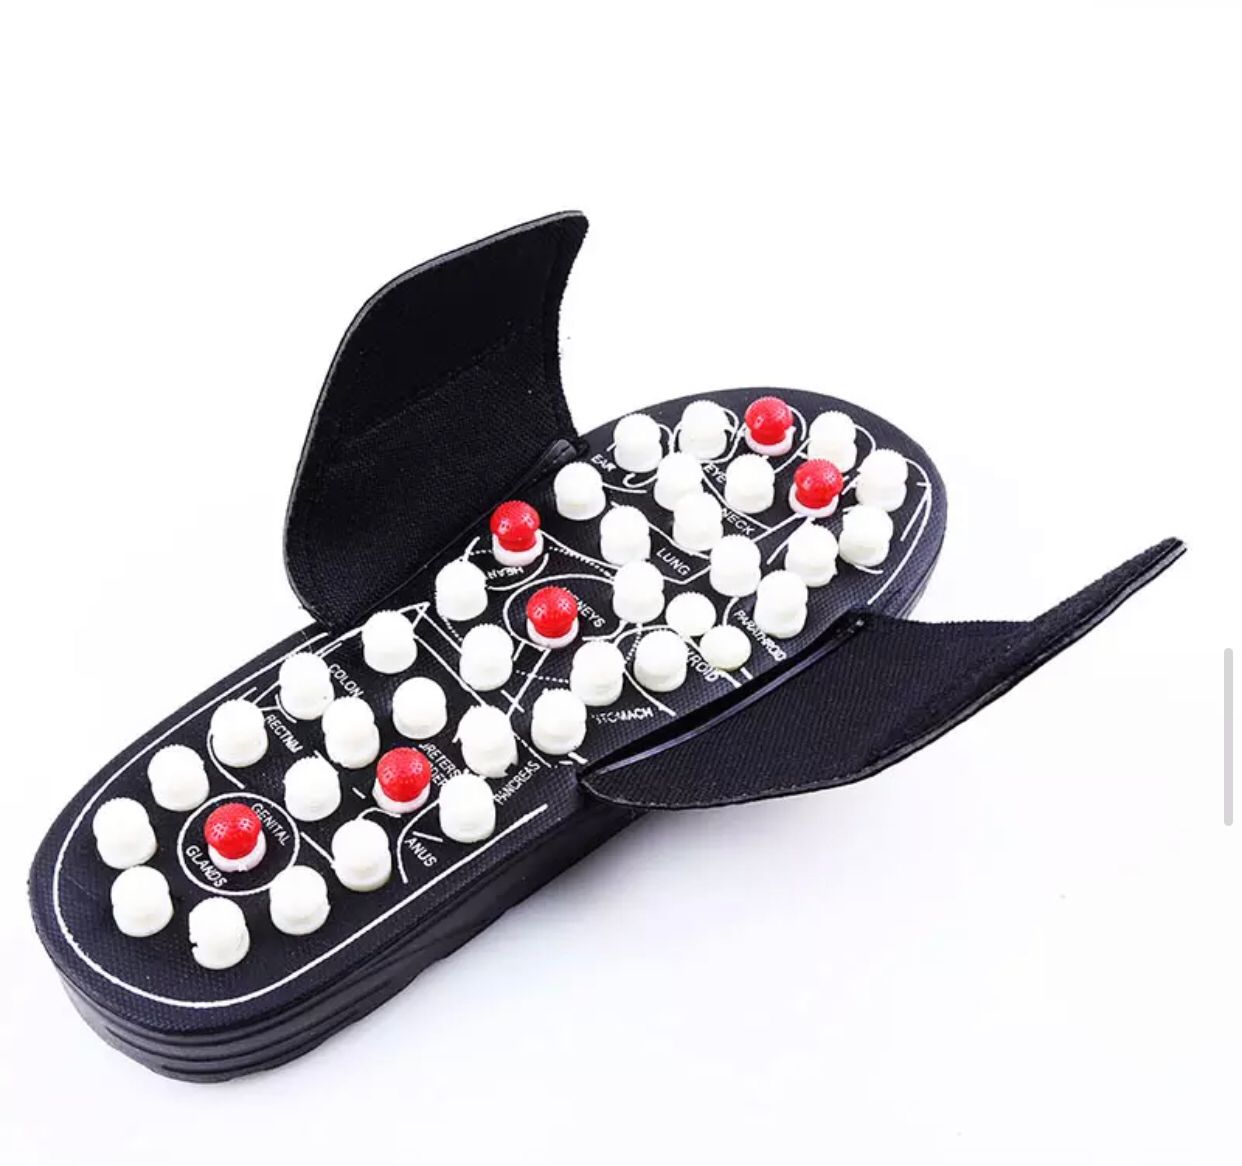 Foot Reflexology Acupuncture Therapy Massager Walk